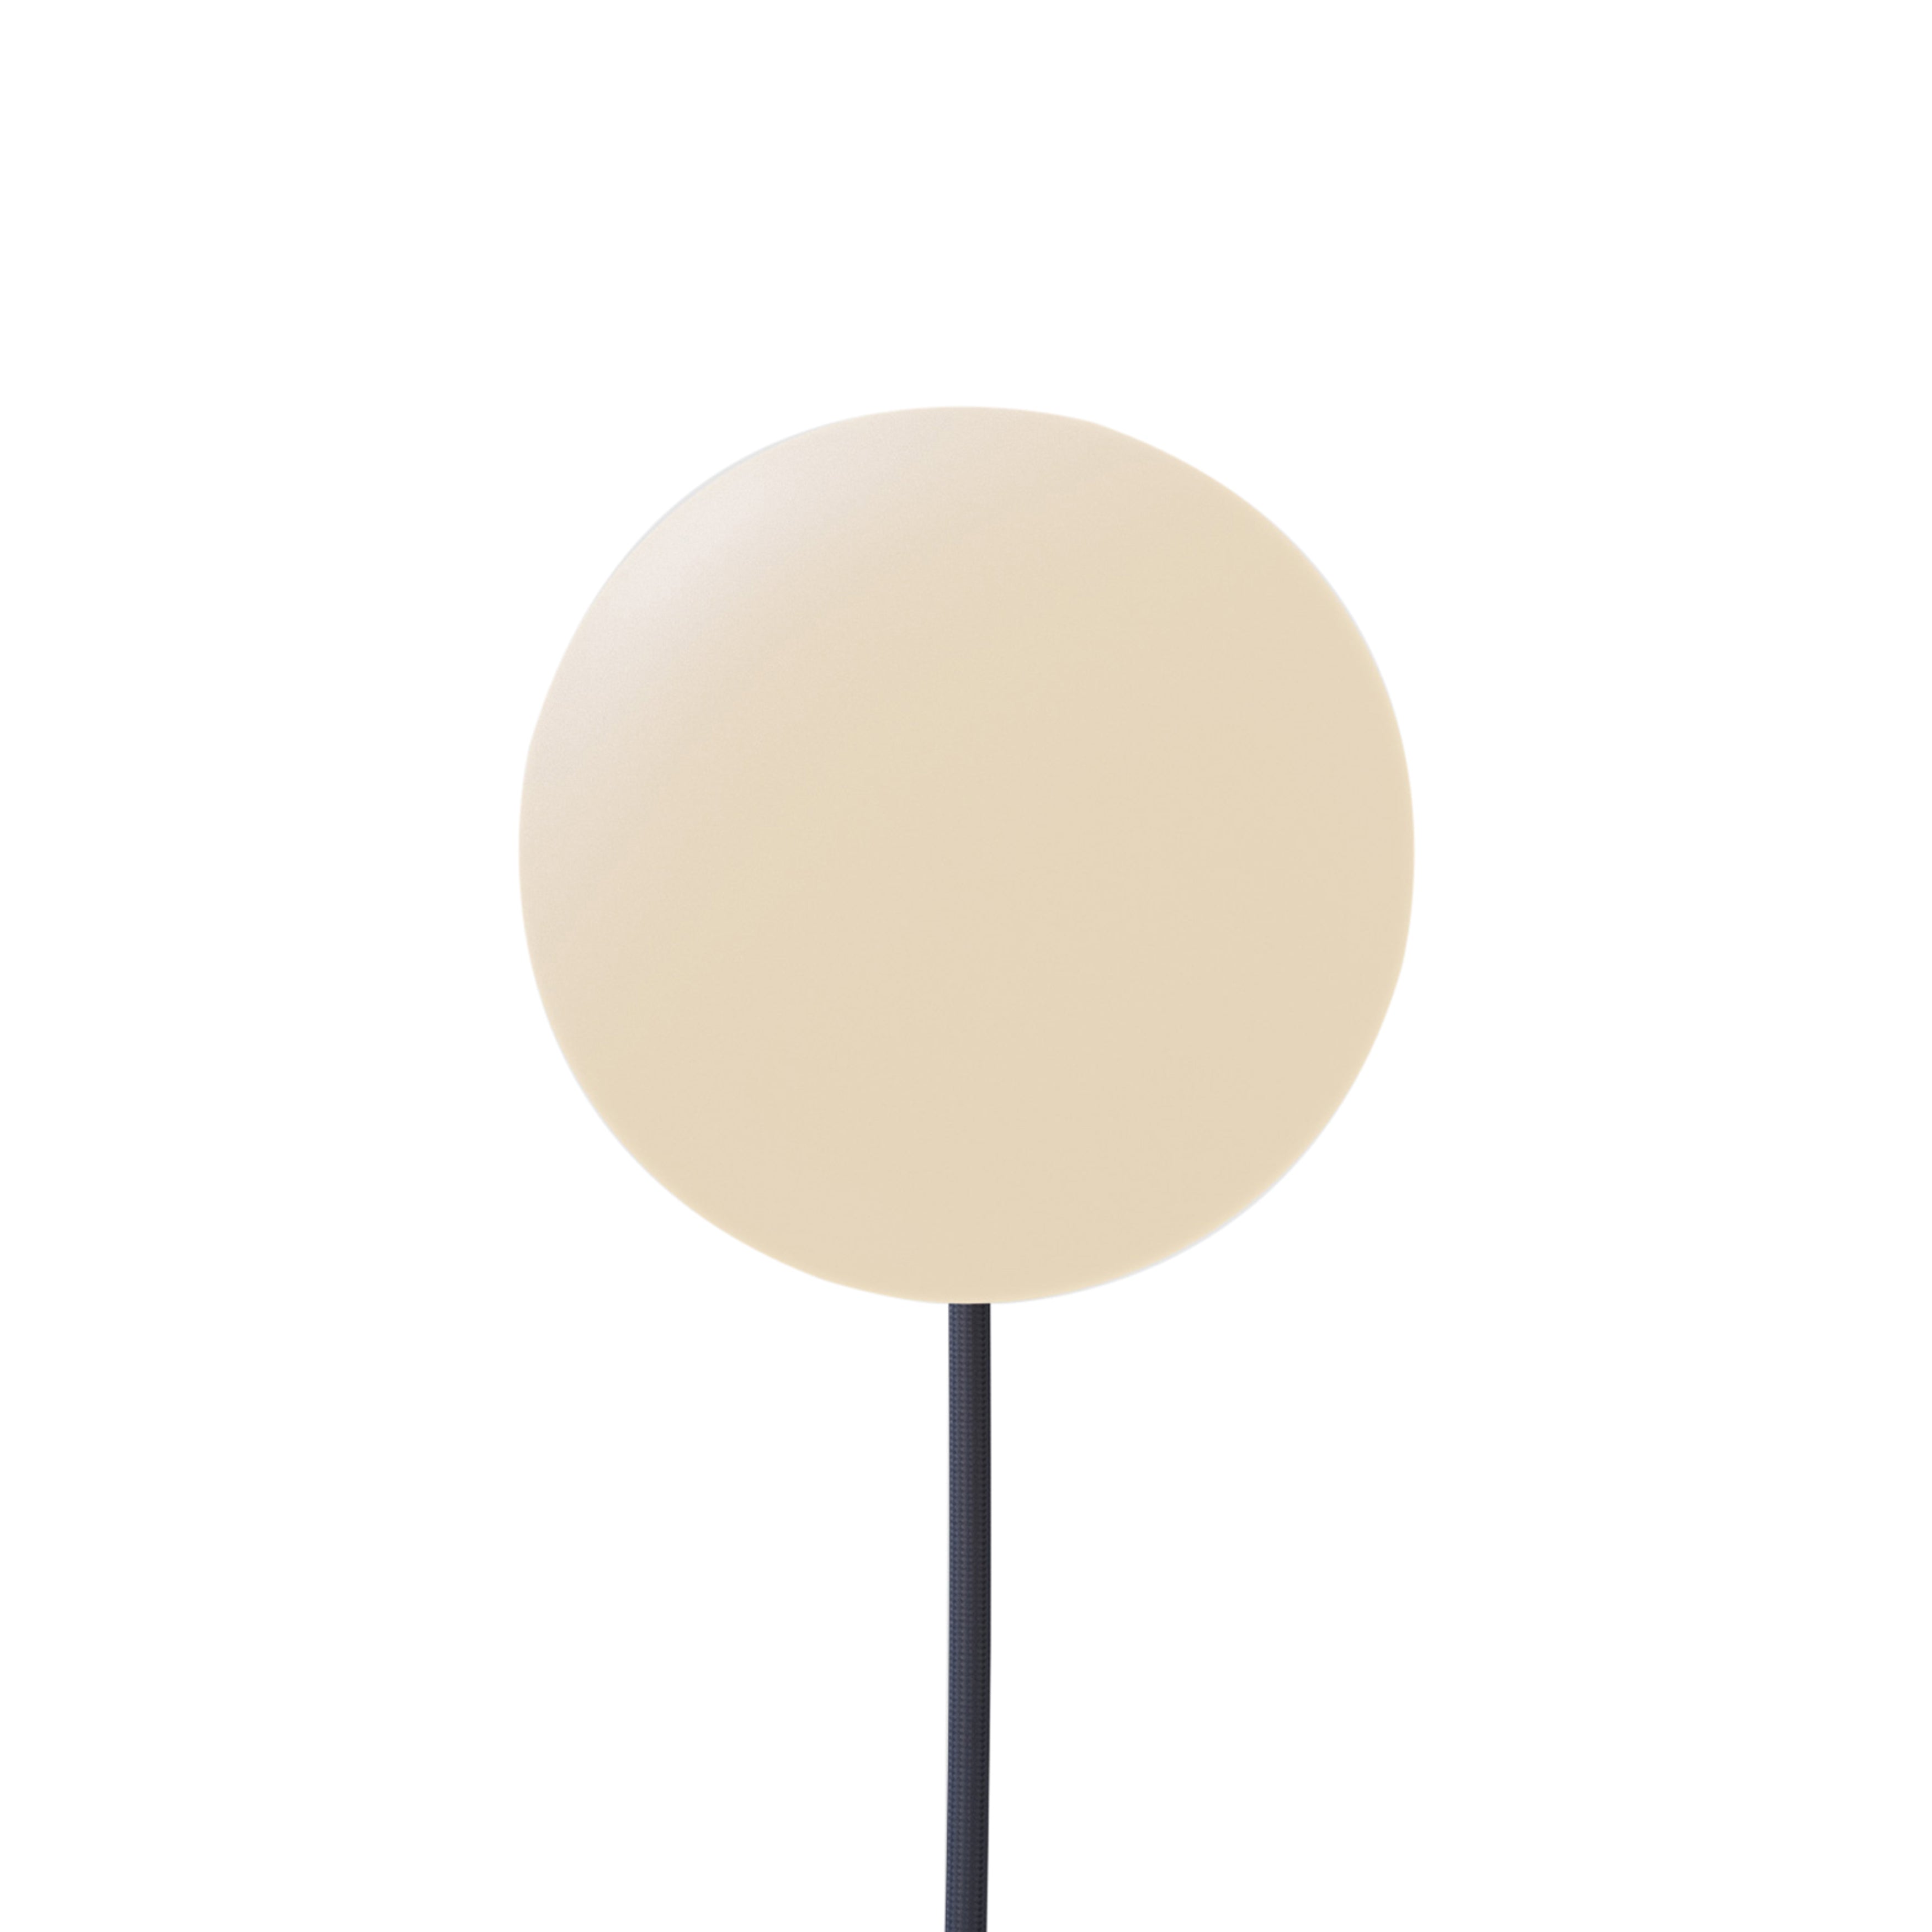 Parc 01 Table Lamp: Handswitch + Midnight Blue